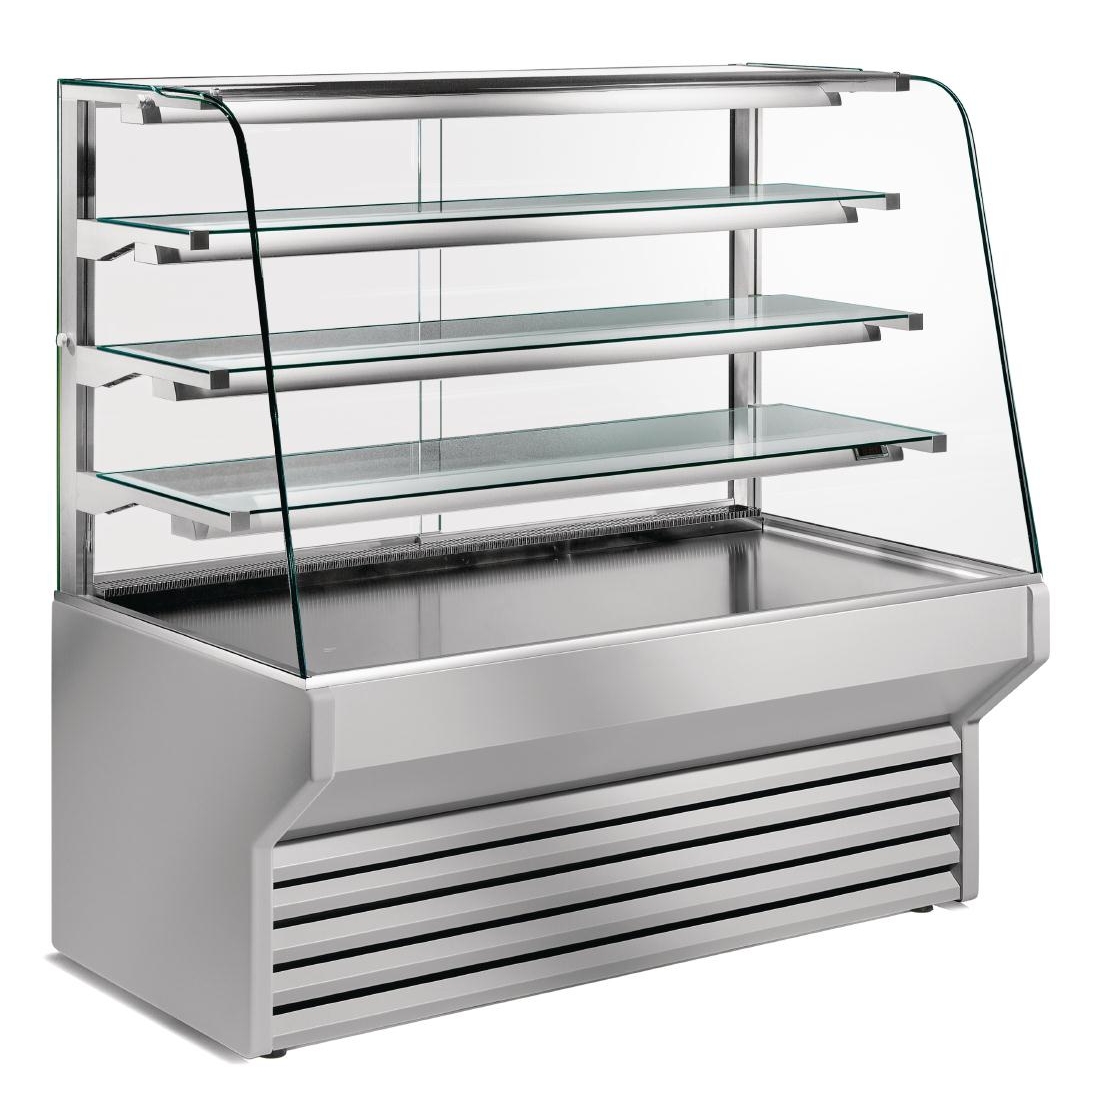 Zoin Harmony Ventilated Bakery Serve Over Counter Chiller 1320mm ES132BSV